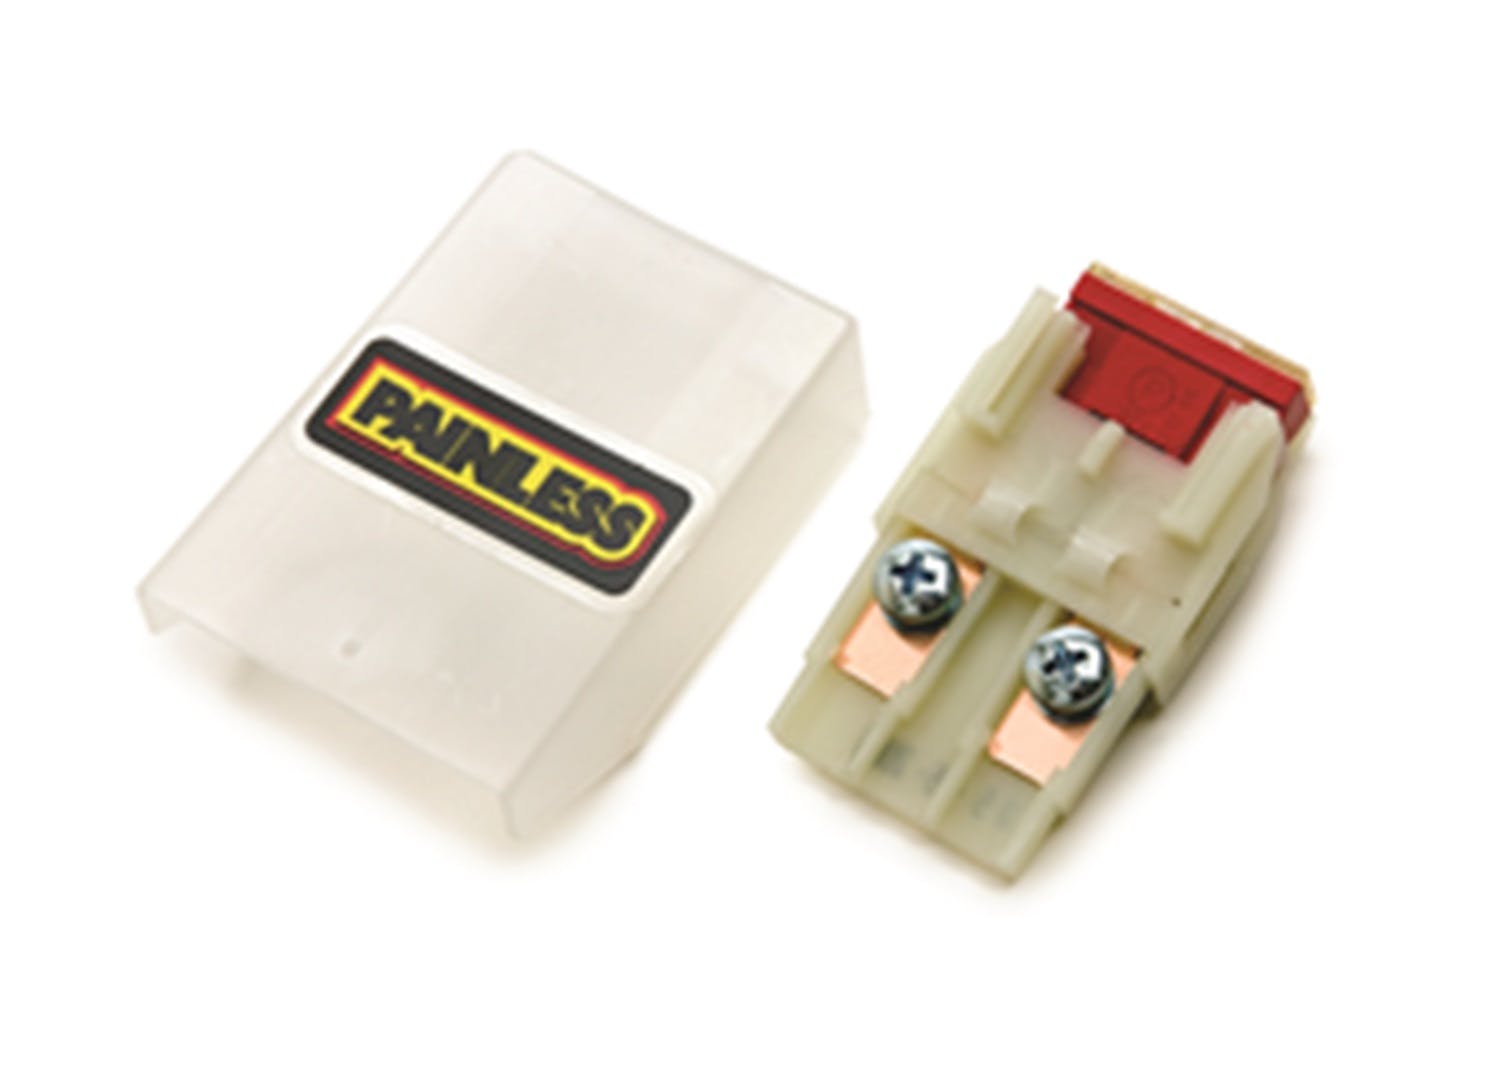 Painless 80101 Maxi Fuse Assembly (includes 70 amp maxi fuse)